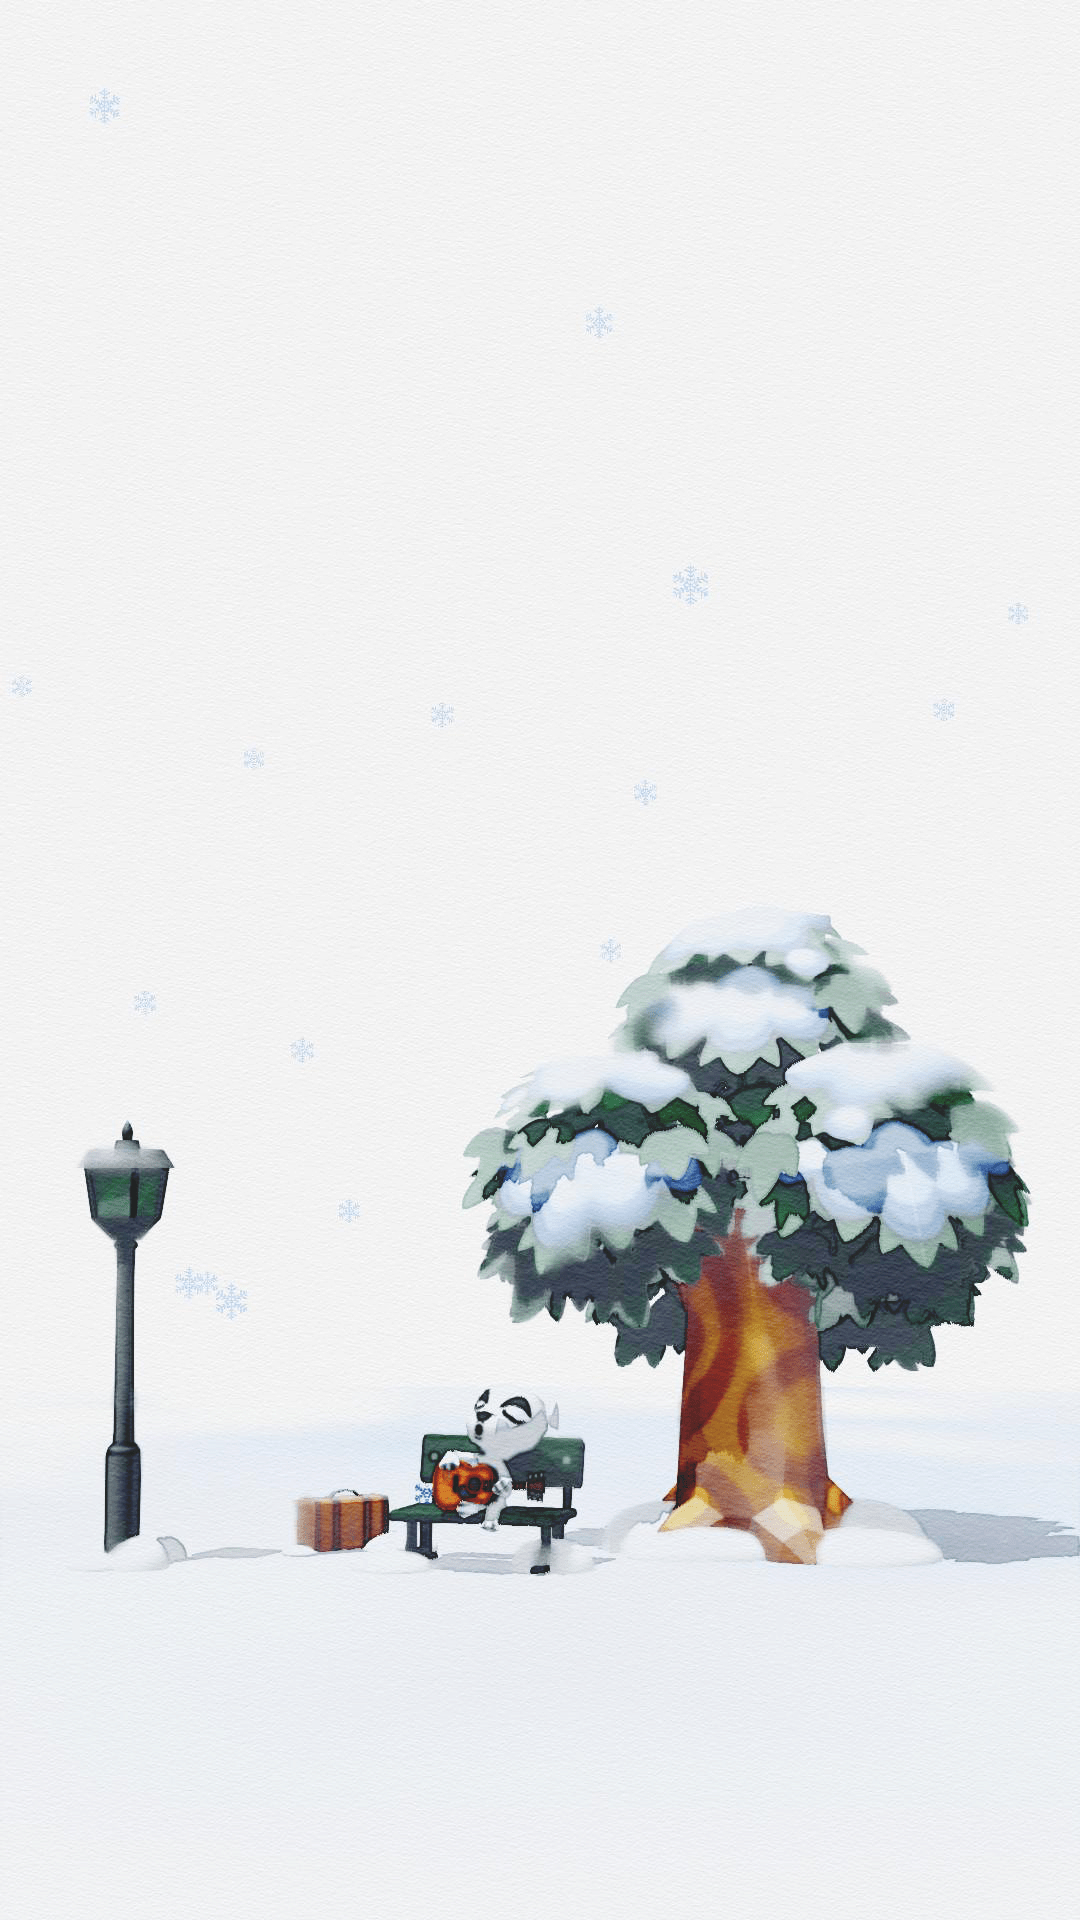 A snowy scene with trees and street lights - Animal Crossing